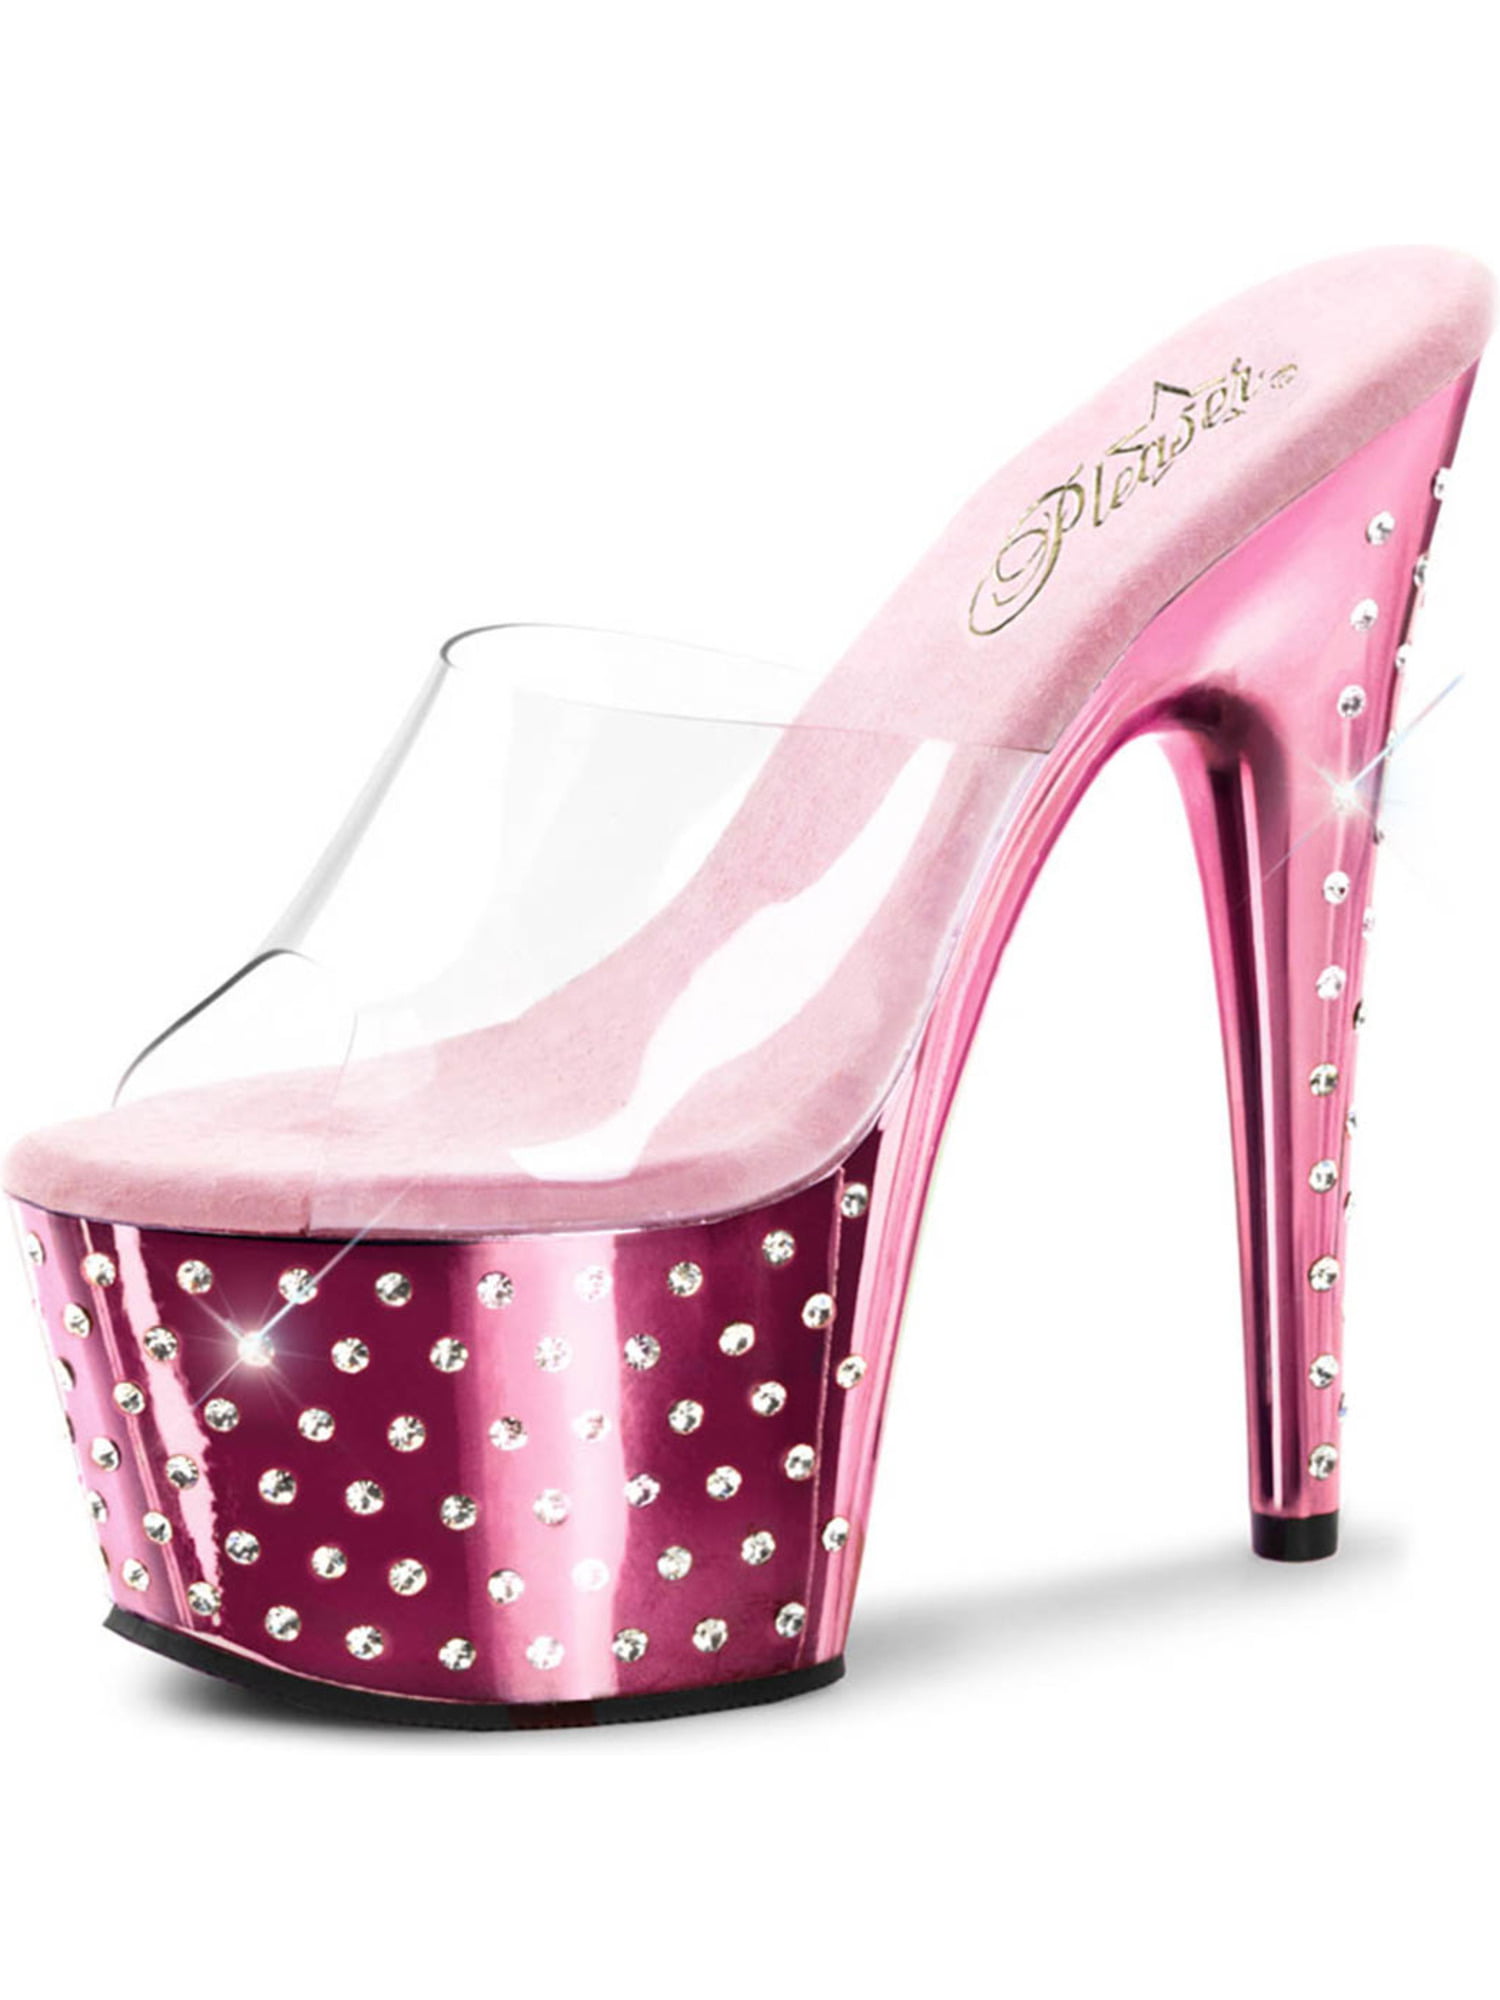 SummitFashions - Shiny Pale Pink Heels with Encrusted Rhinestones and 7 ...